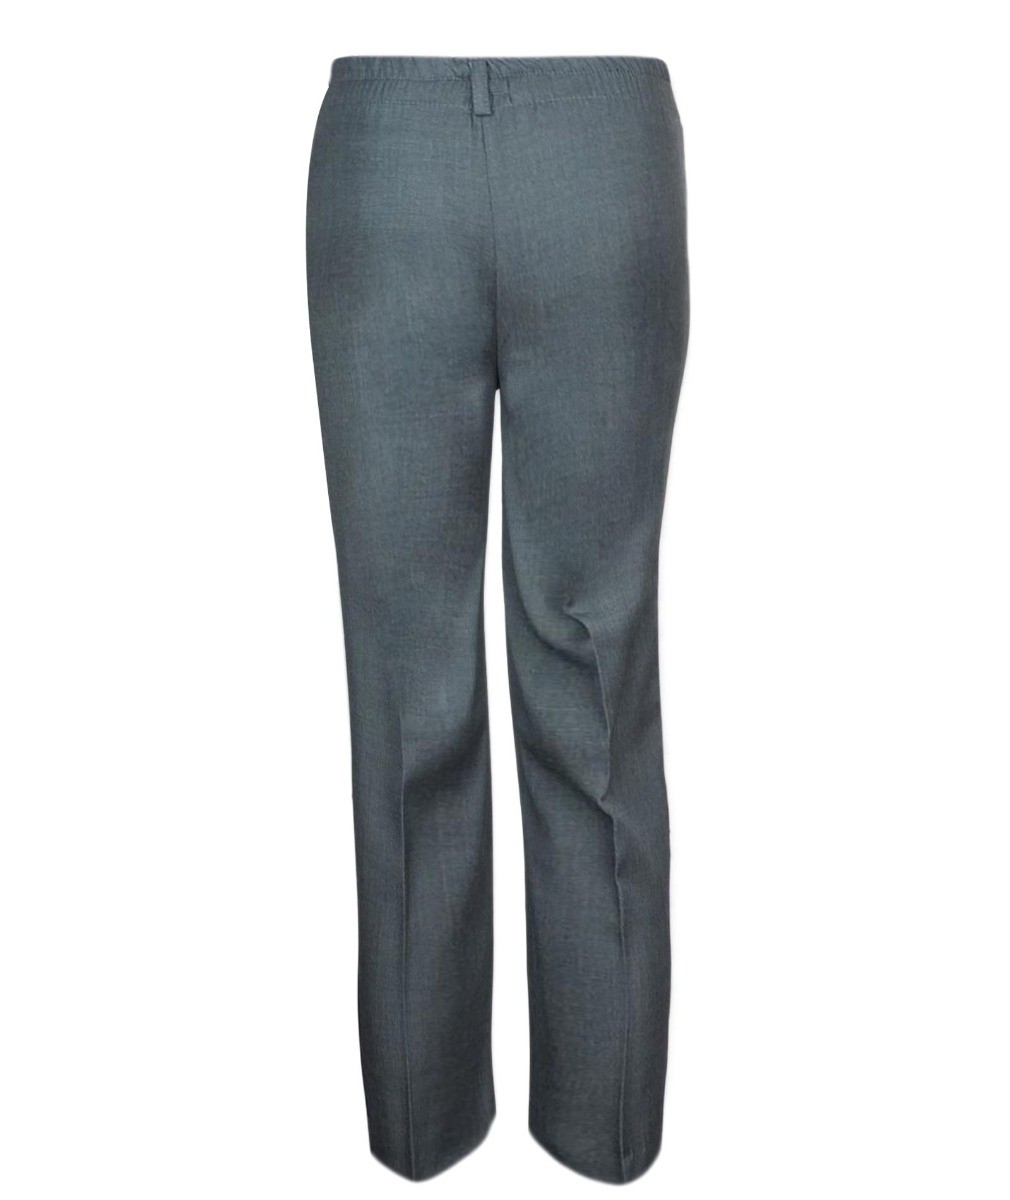 Boys Formal  Suit Trousers - Grey